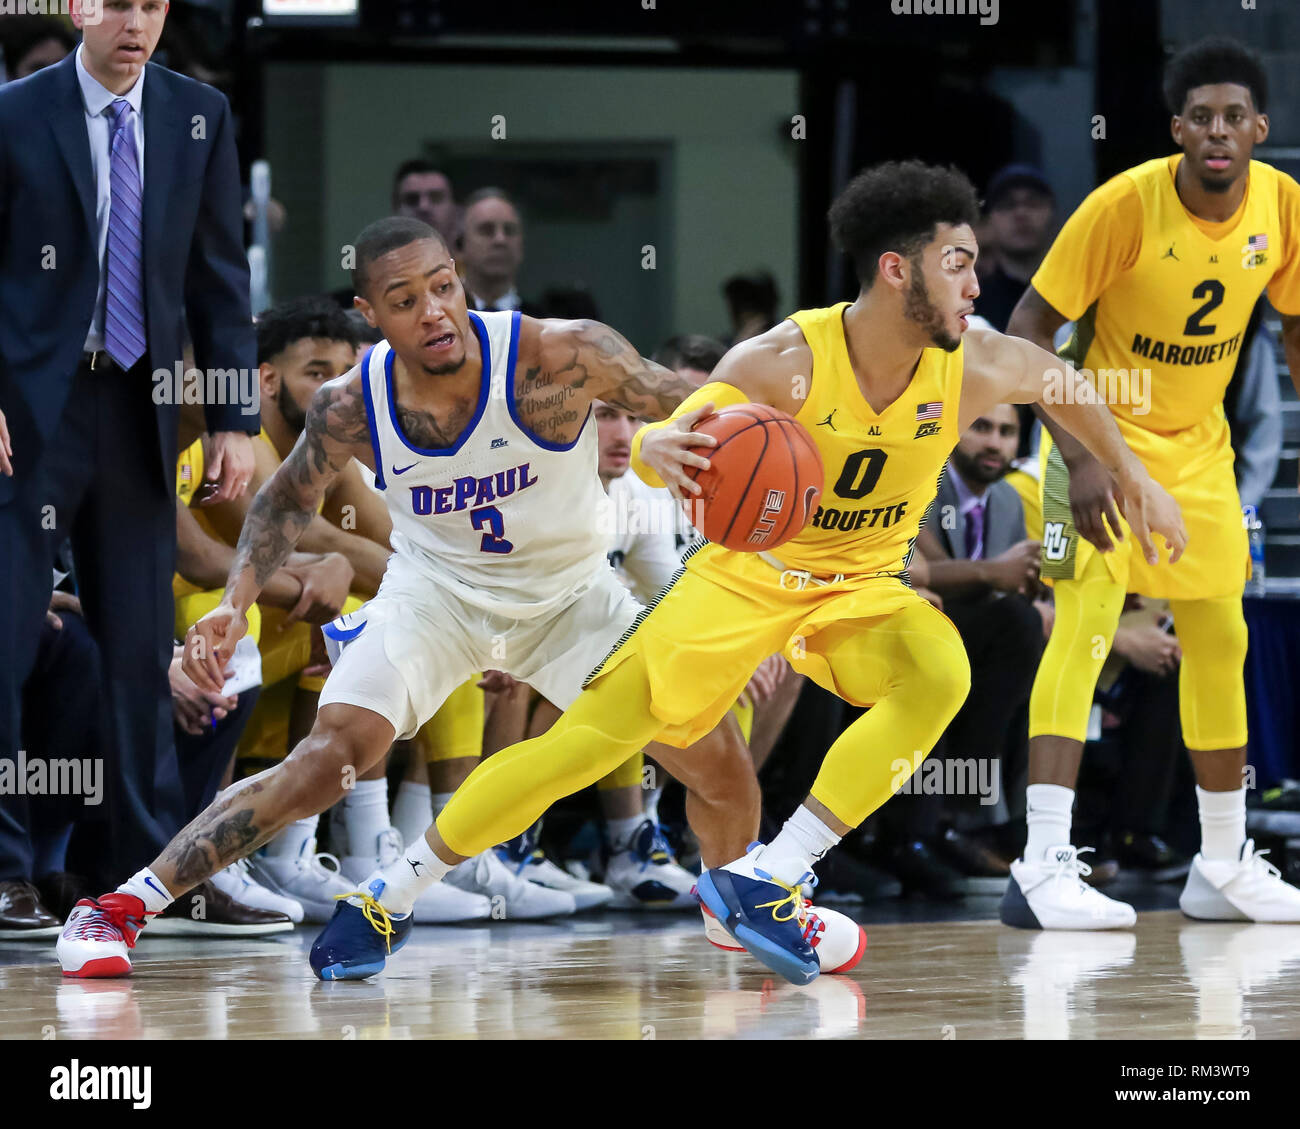 Chicago, USA. 12th Feb 2019. Marquette Golden Eagles guard Markus Howard (0) makes a quick move on DePaul Blue Demons guard Devin Gage (3) during NCAA basketball game between the Marquette Golden Eagles and the DePaul University Blue Demons at Wintrust Arena in Chicago IL. Gary E. Duncan Sr/CSM Credit: Cal Sport Media/Alamy Live News Stock Photo